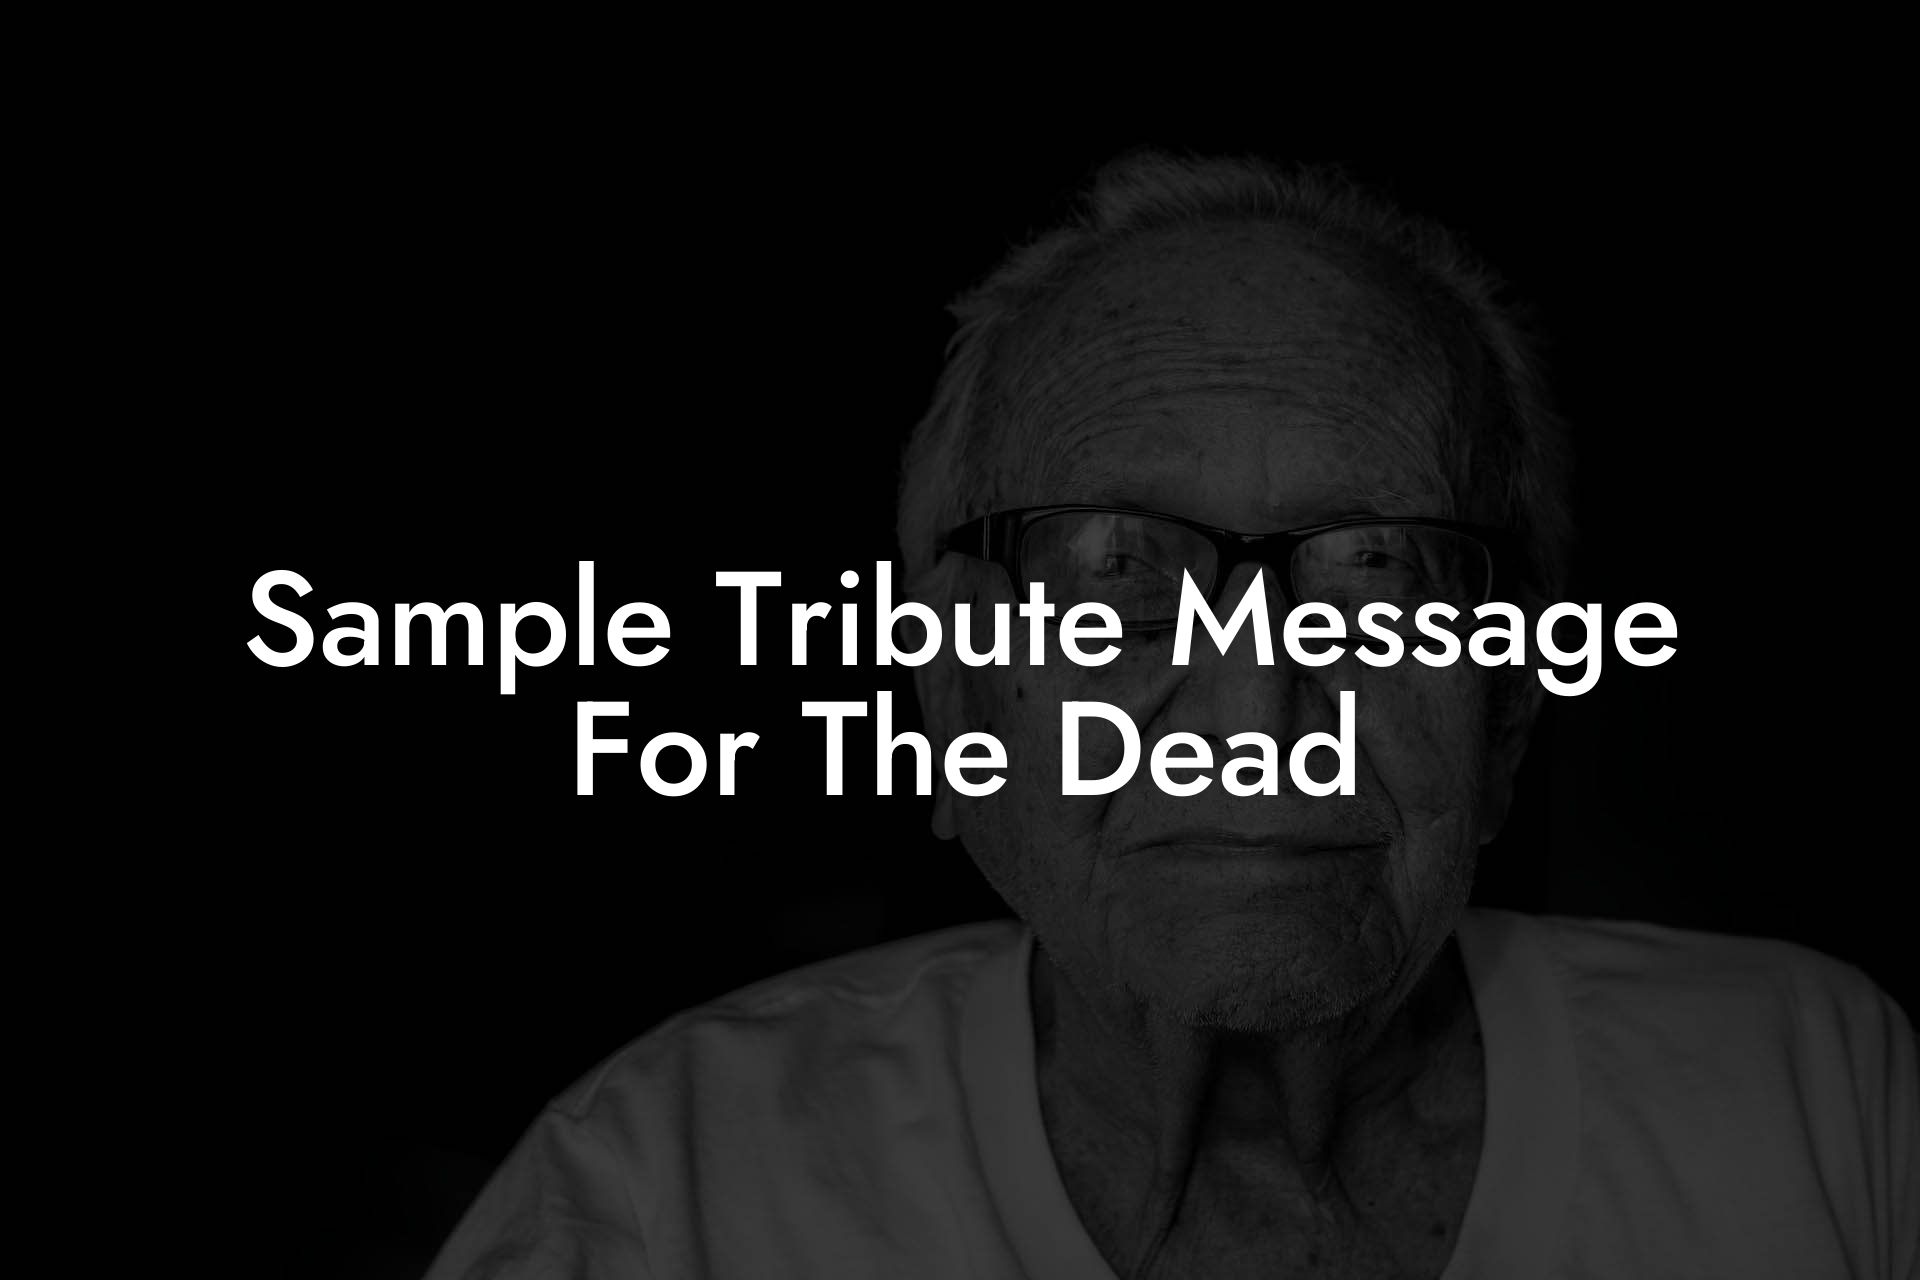 Sample Tribute Message For The Dead